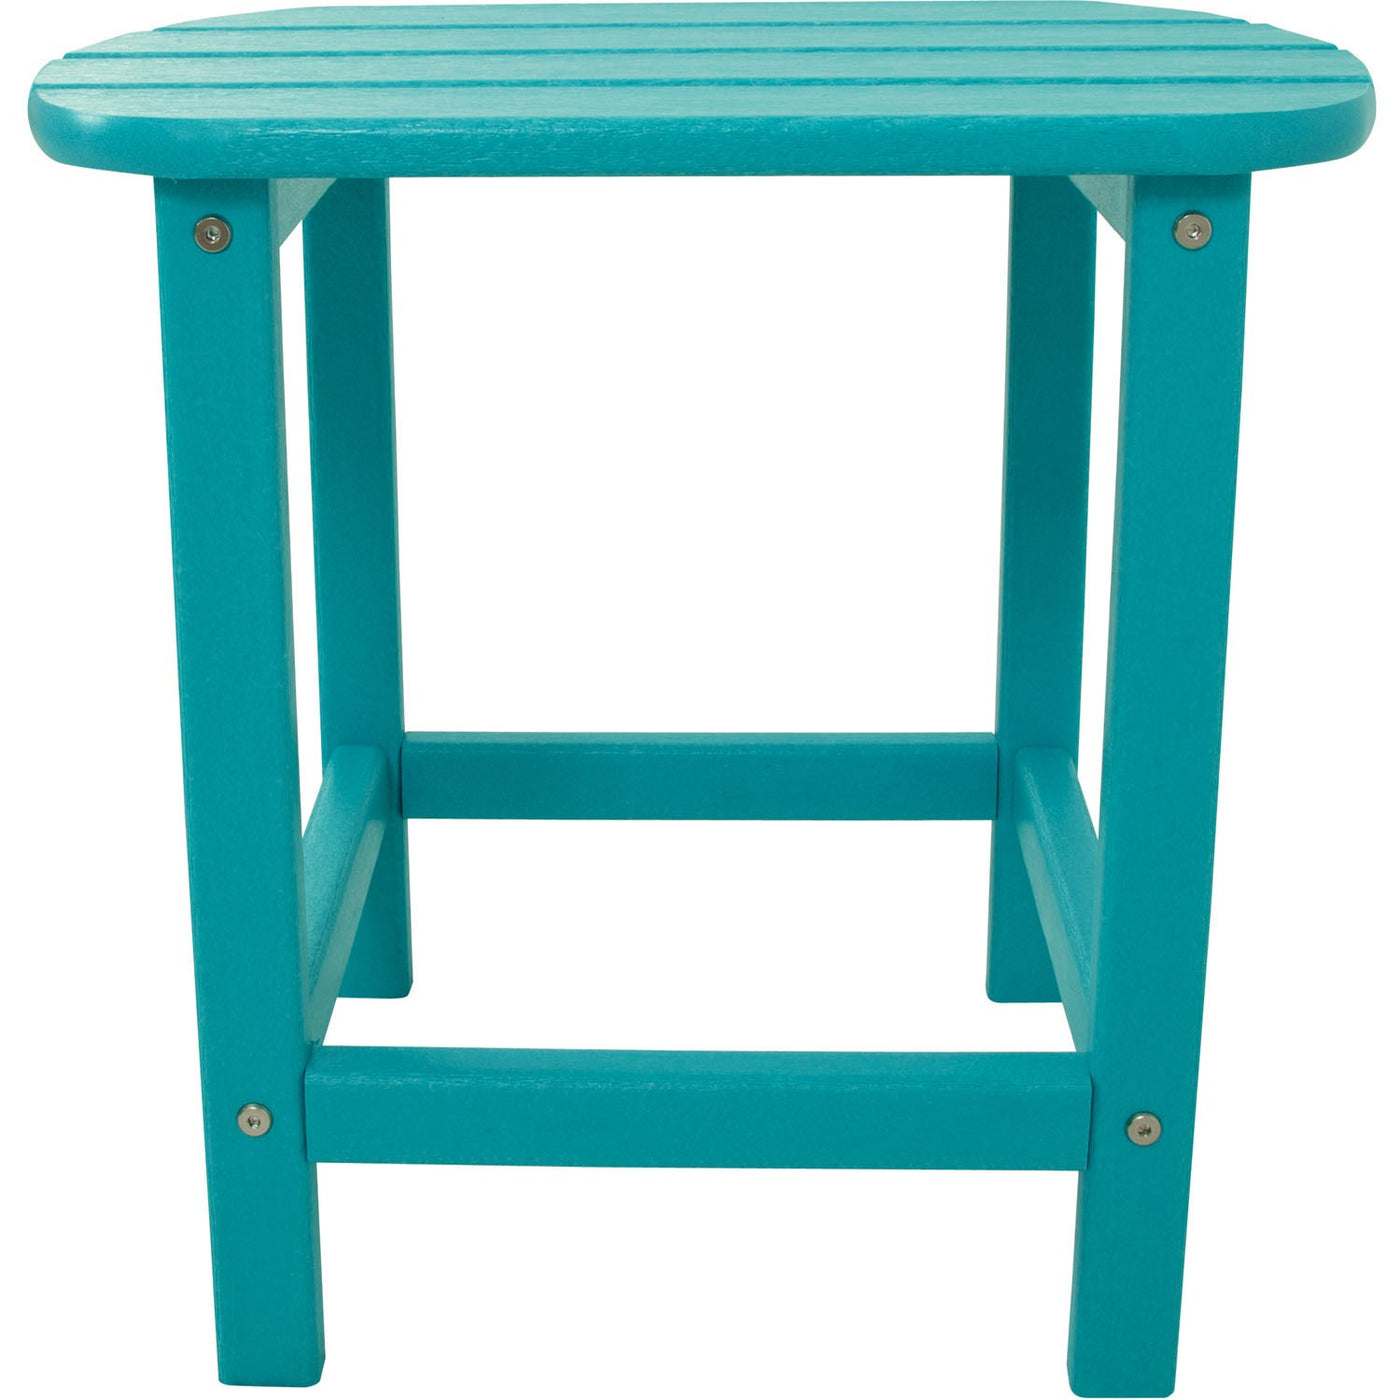 Hanover All-Weather 19"x15" Side Table - Blue, Aruba - GreenLivingSupply-Store